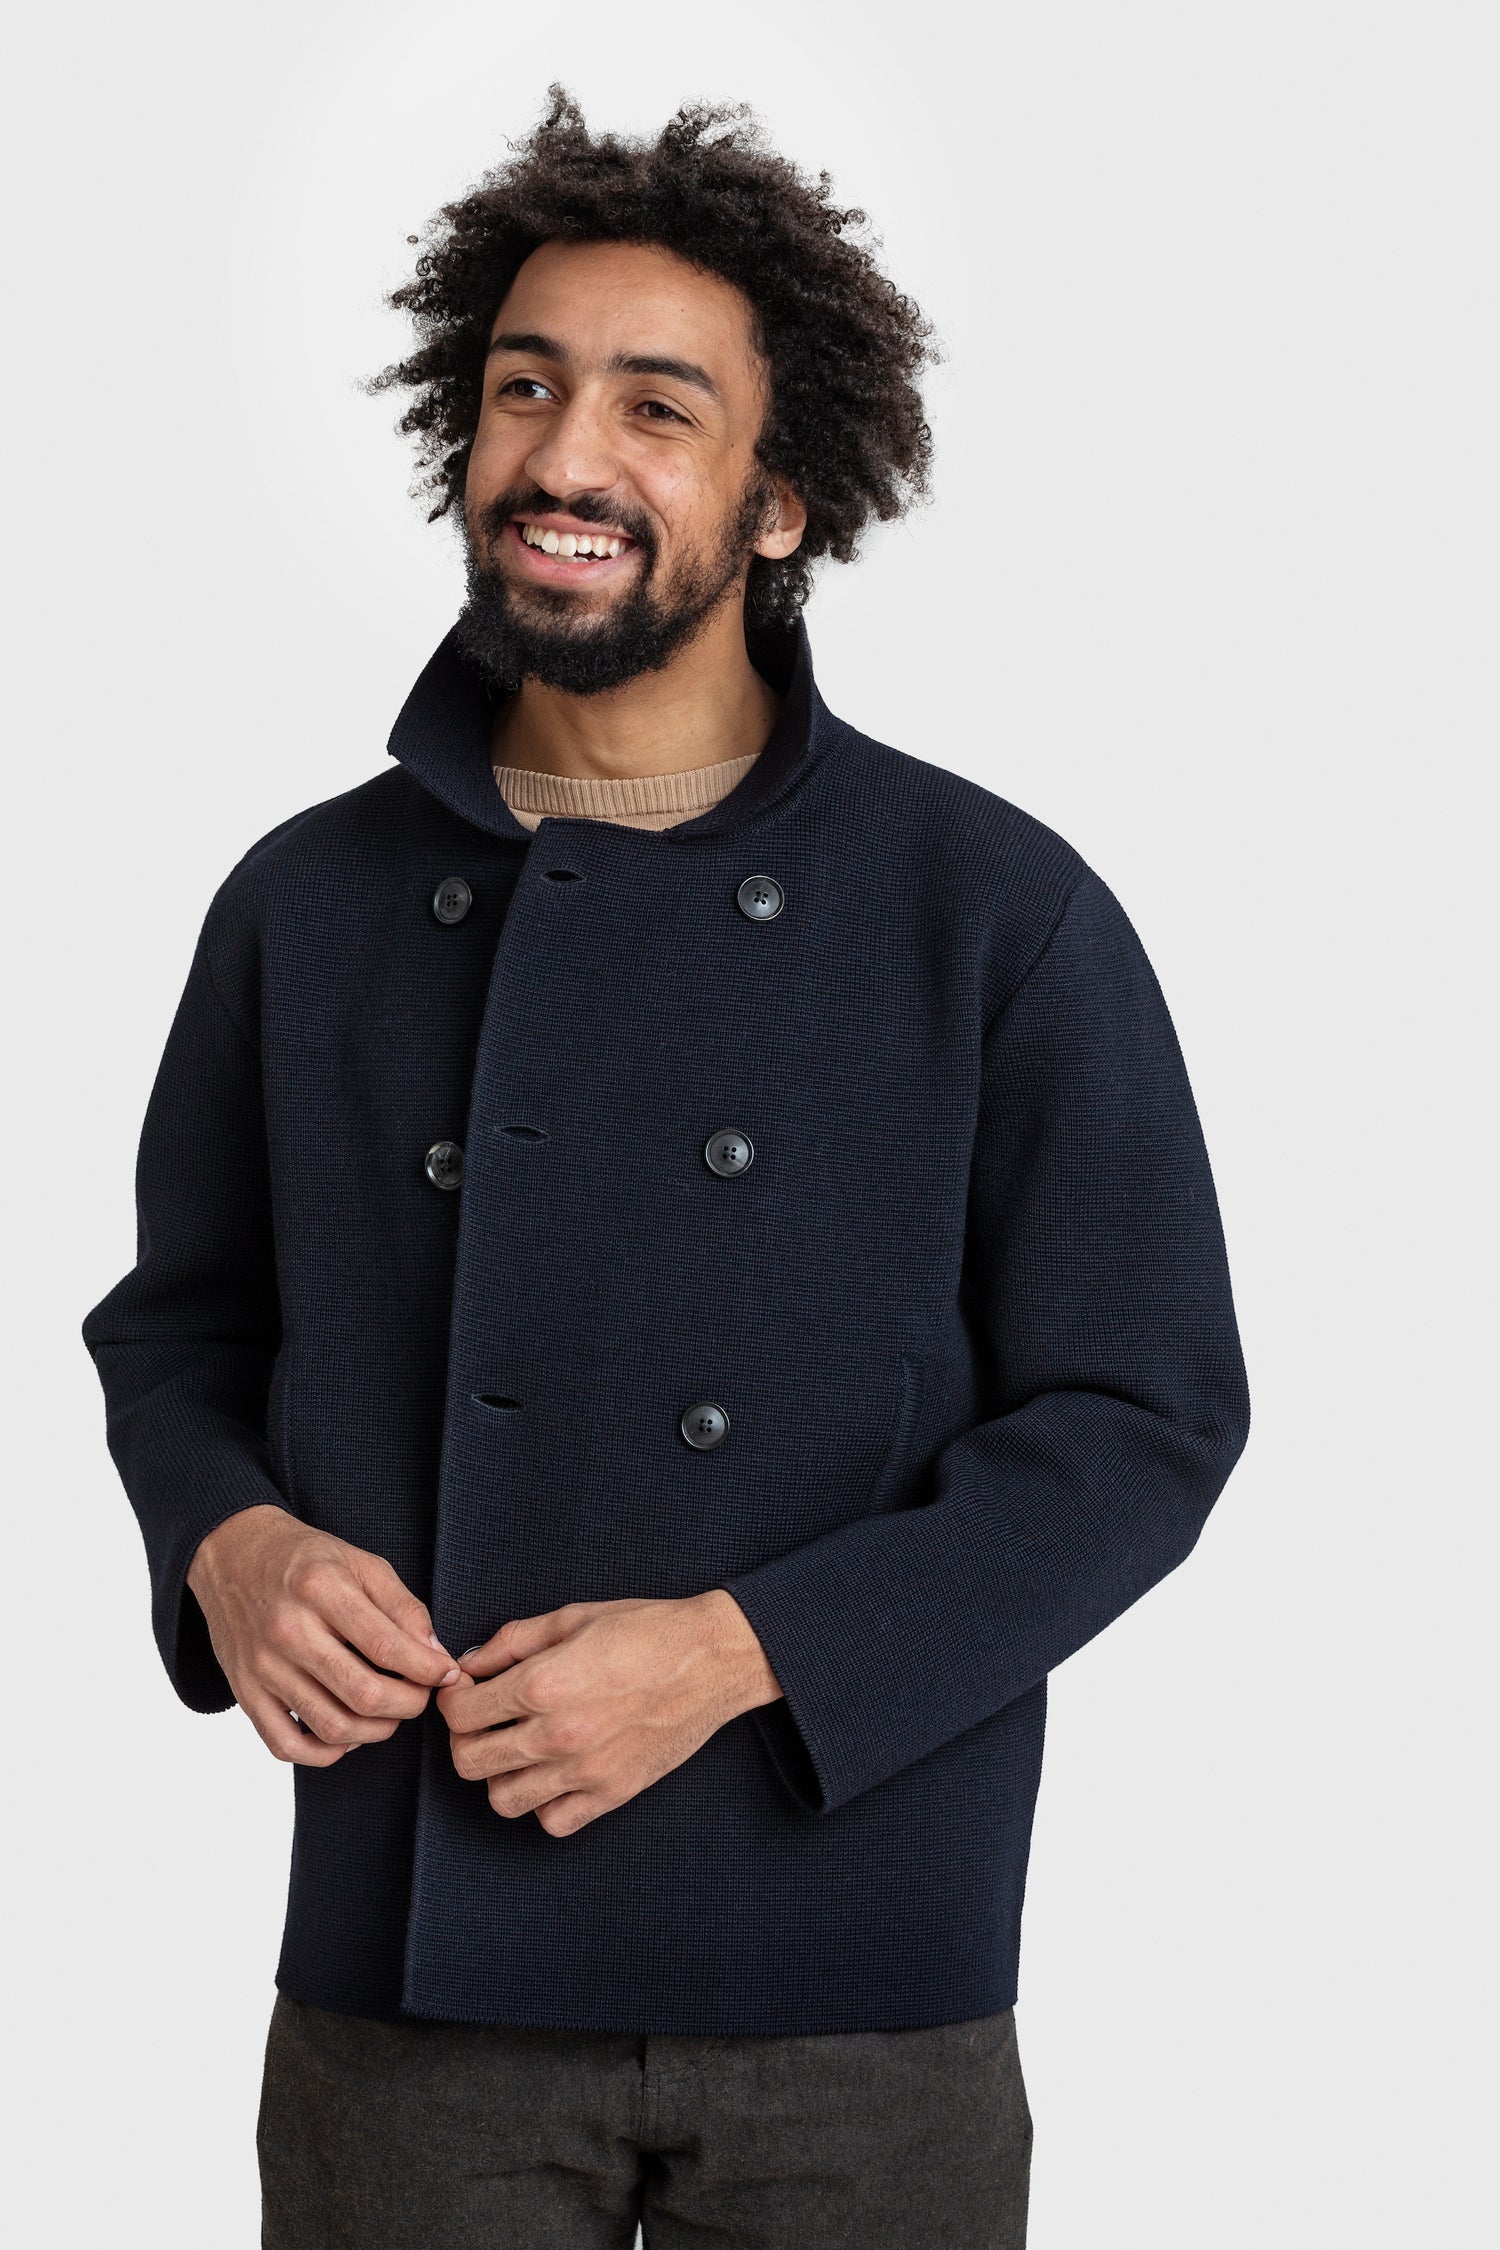 Isaac wearing Peacoat in Navy Blue